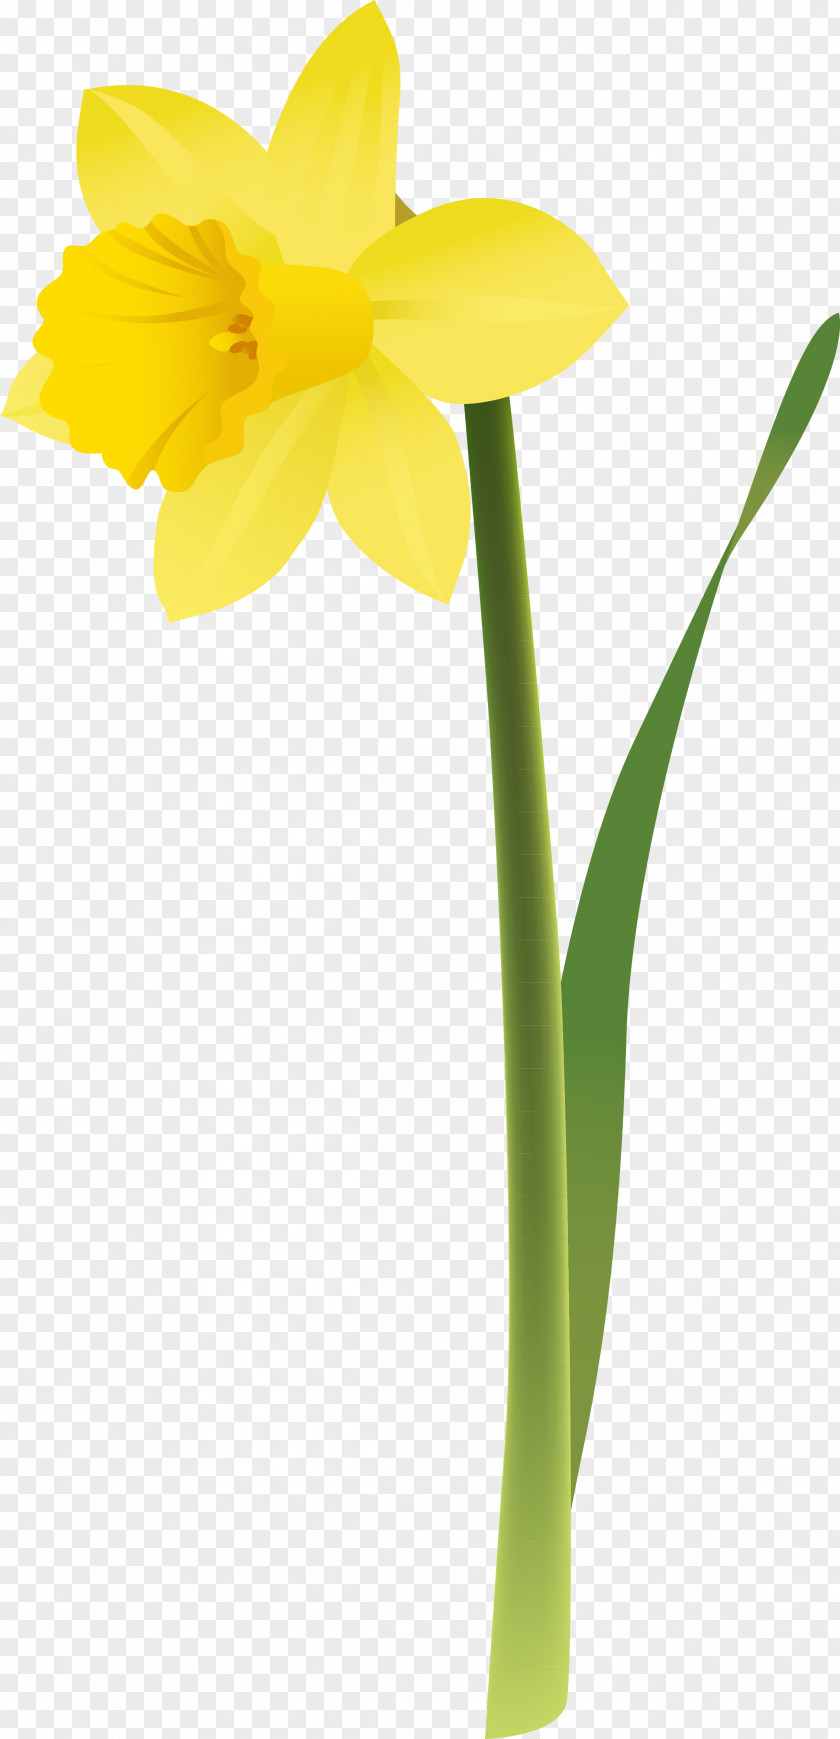 Narcissus Daffodil Flower Clip Art PNG